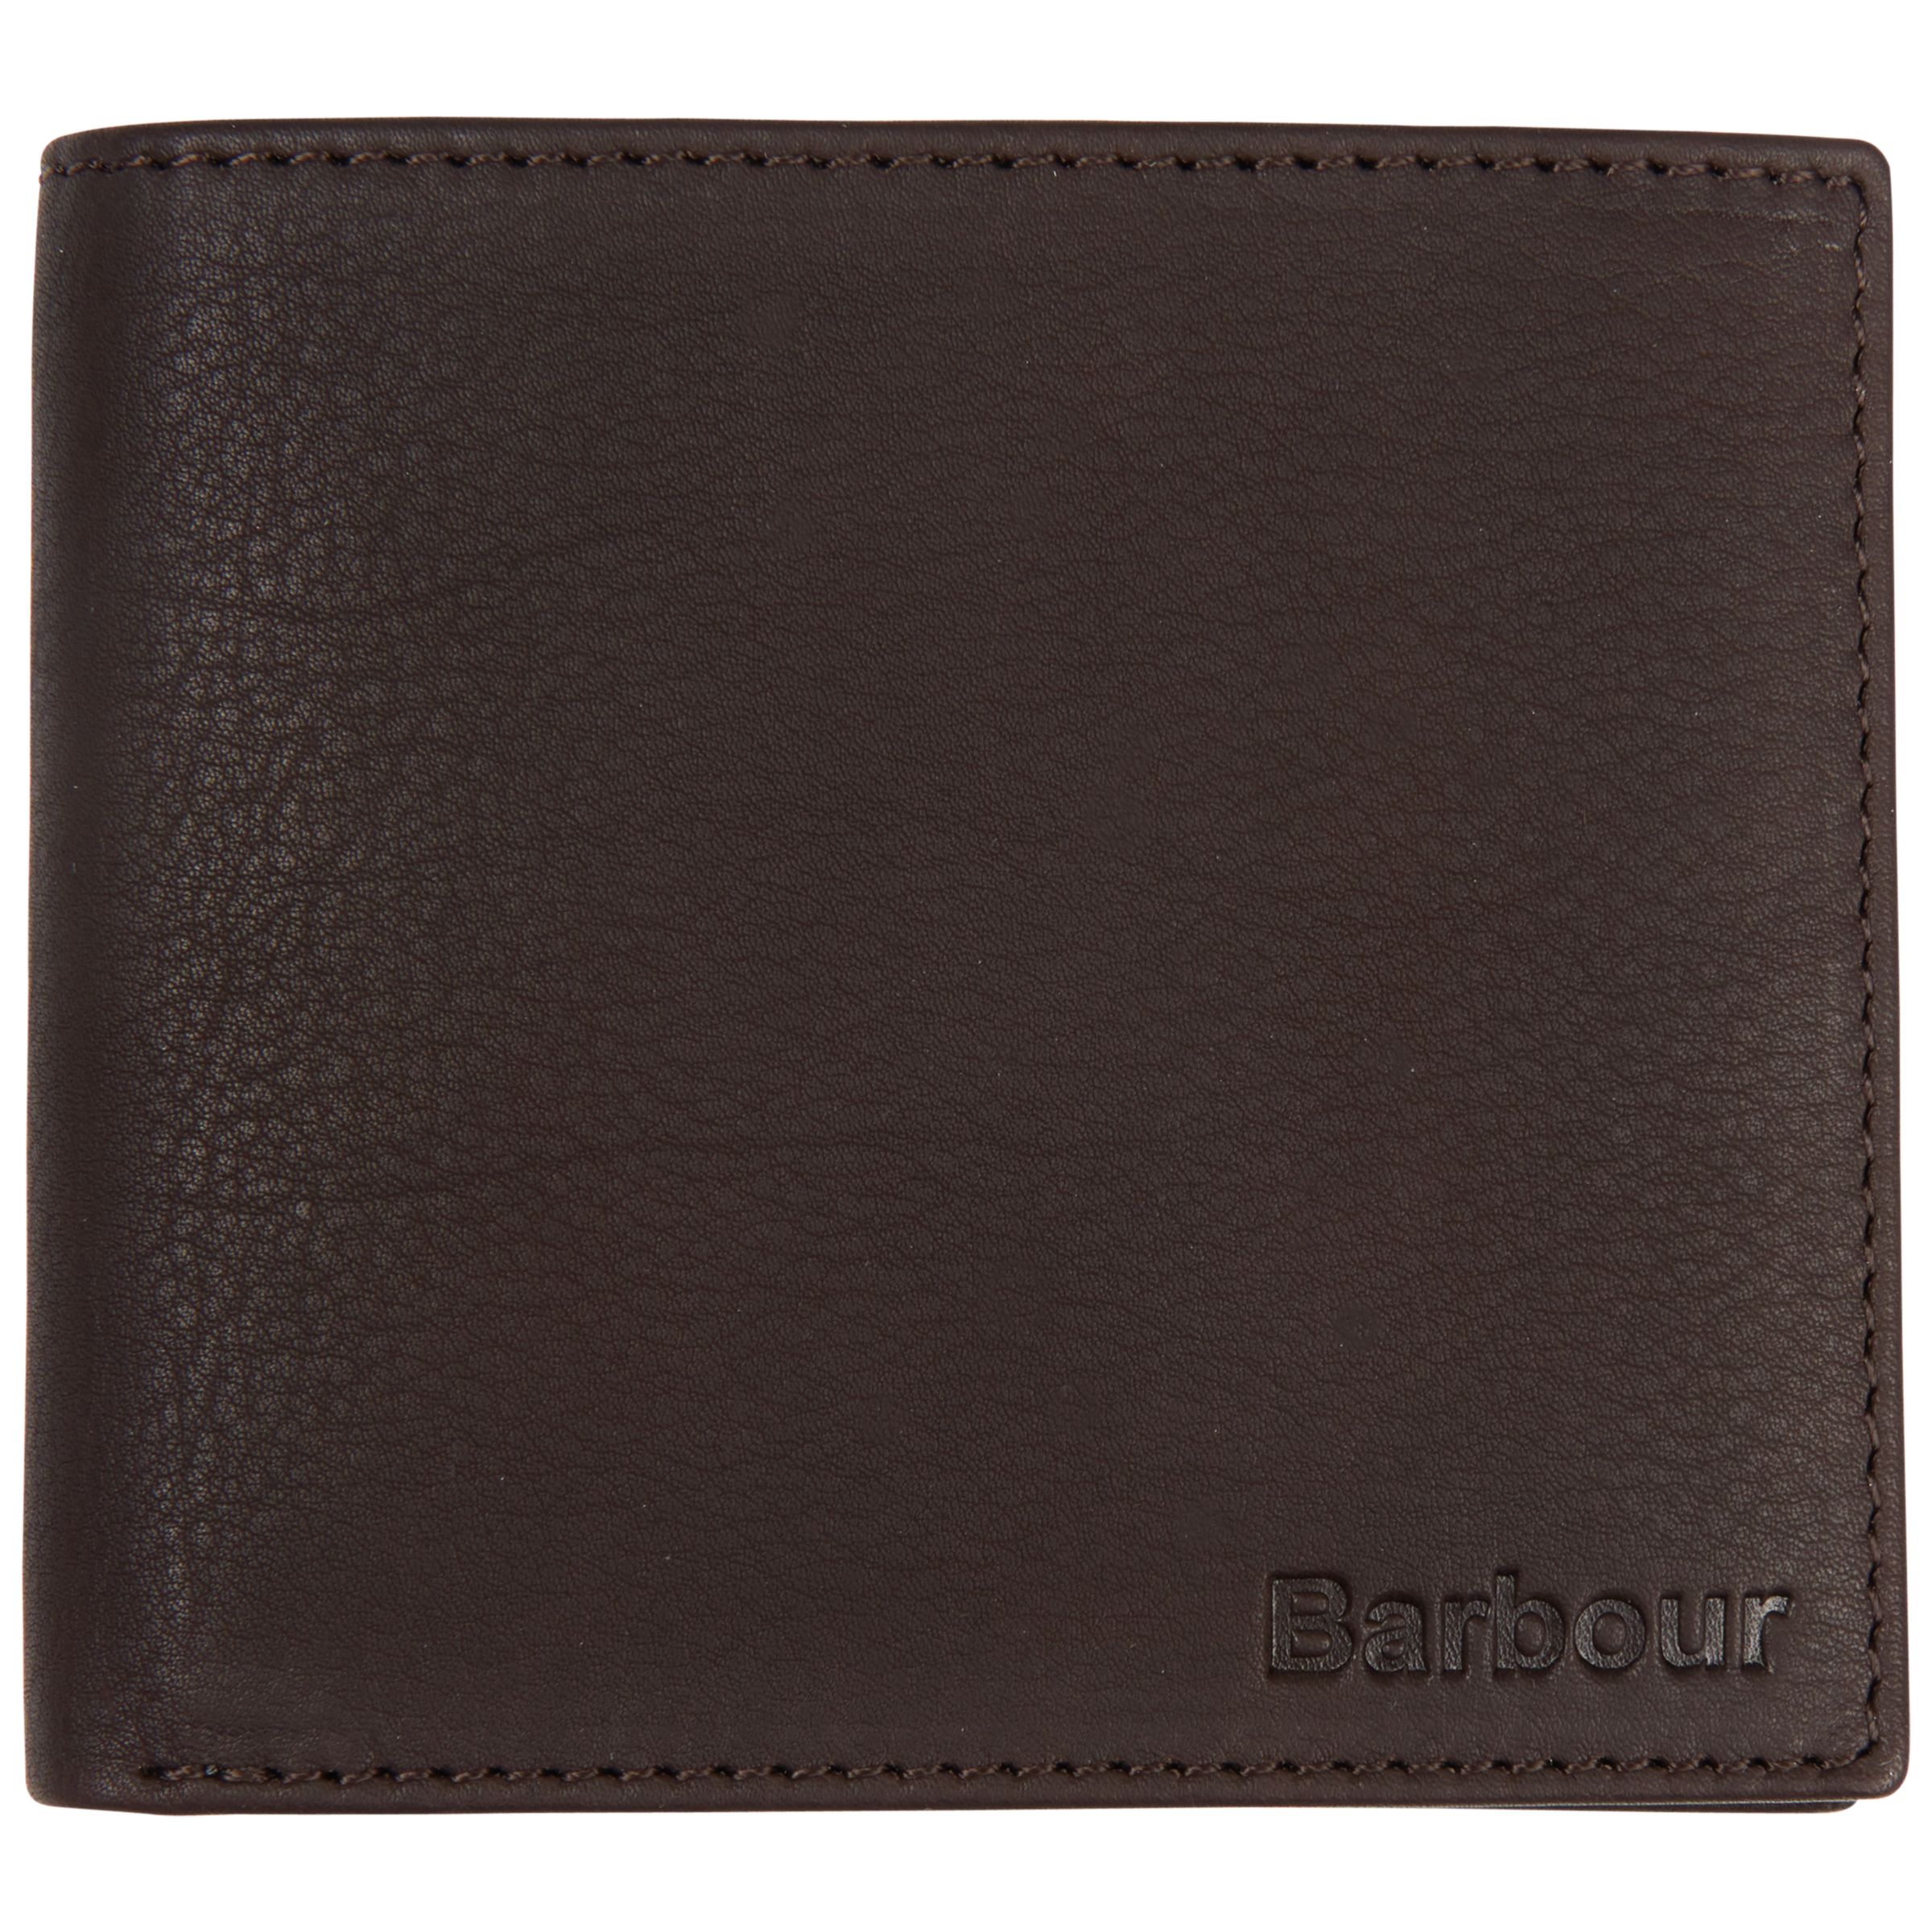 Barbour Leather Coin Wallet, Dark Brown 